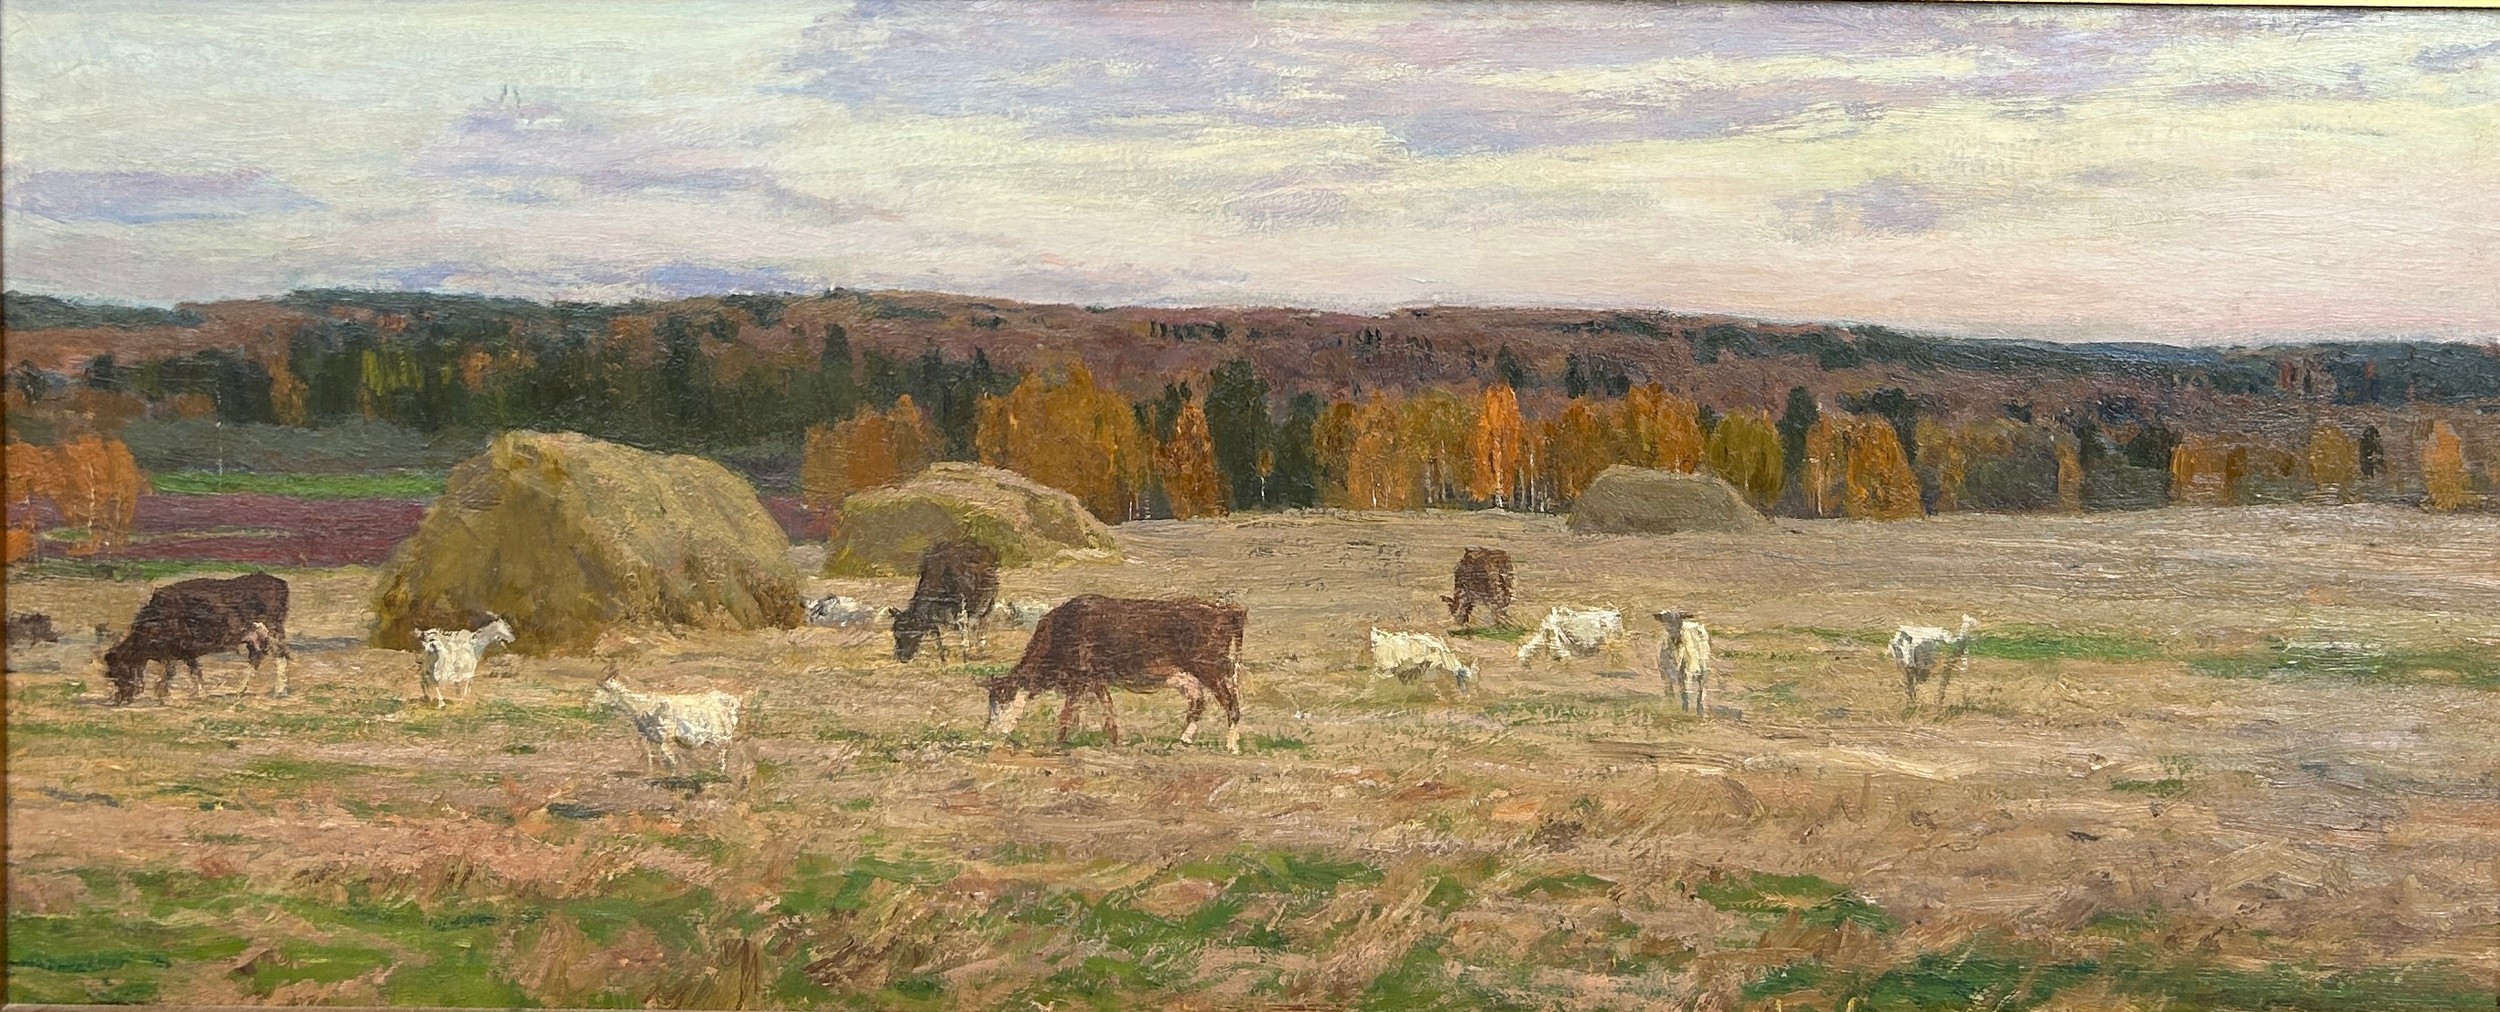 ALEKSEI MIKHAILOVICH GRITSAI (1914-1998): AN OIL ON BOARD PAINTING DEPICTING CATTLE IN A FIELD - Image 2 of 8